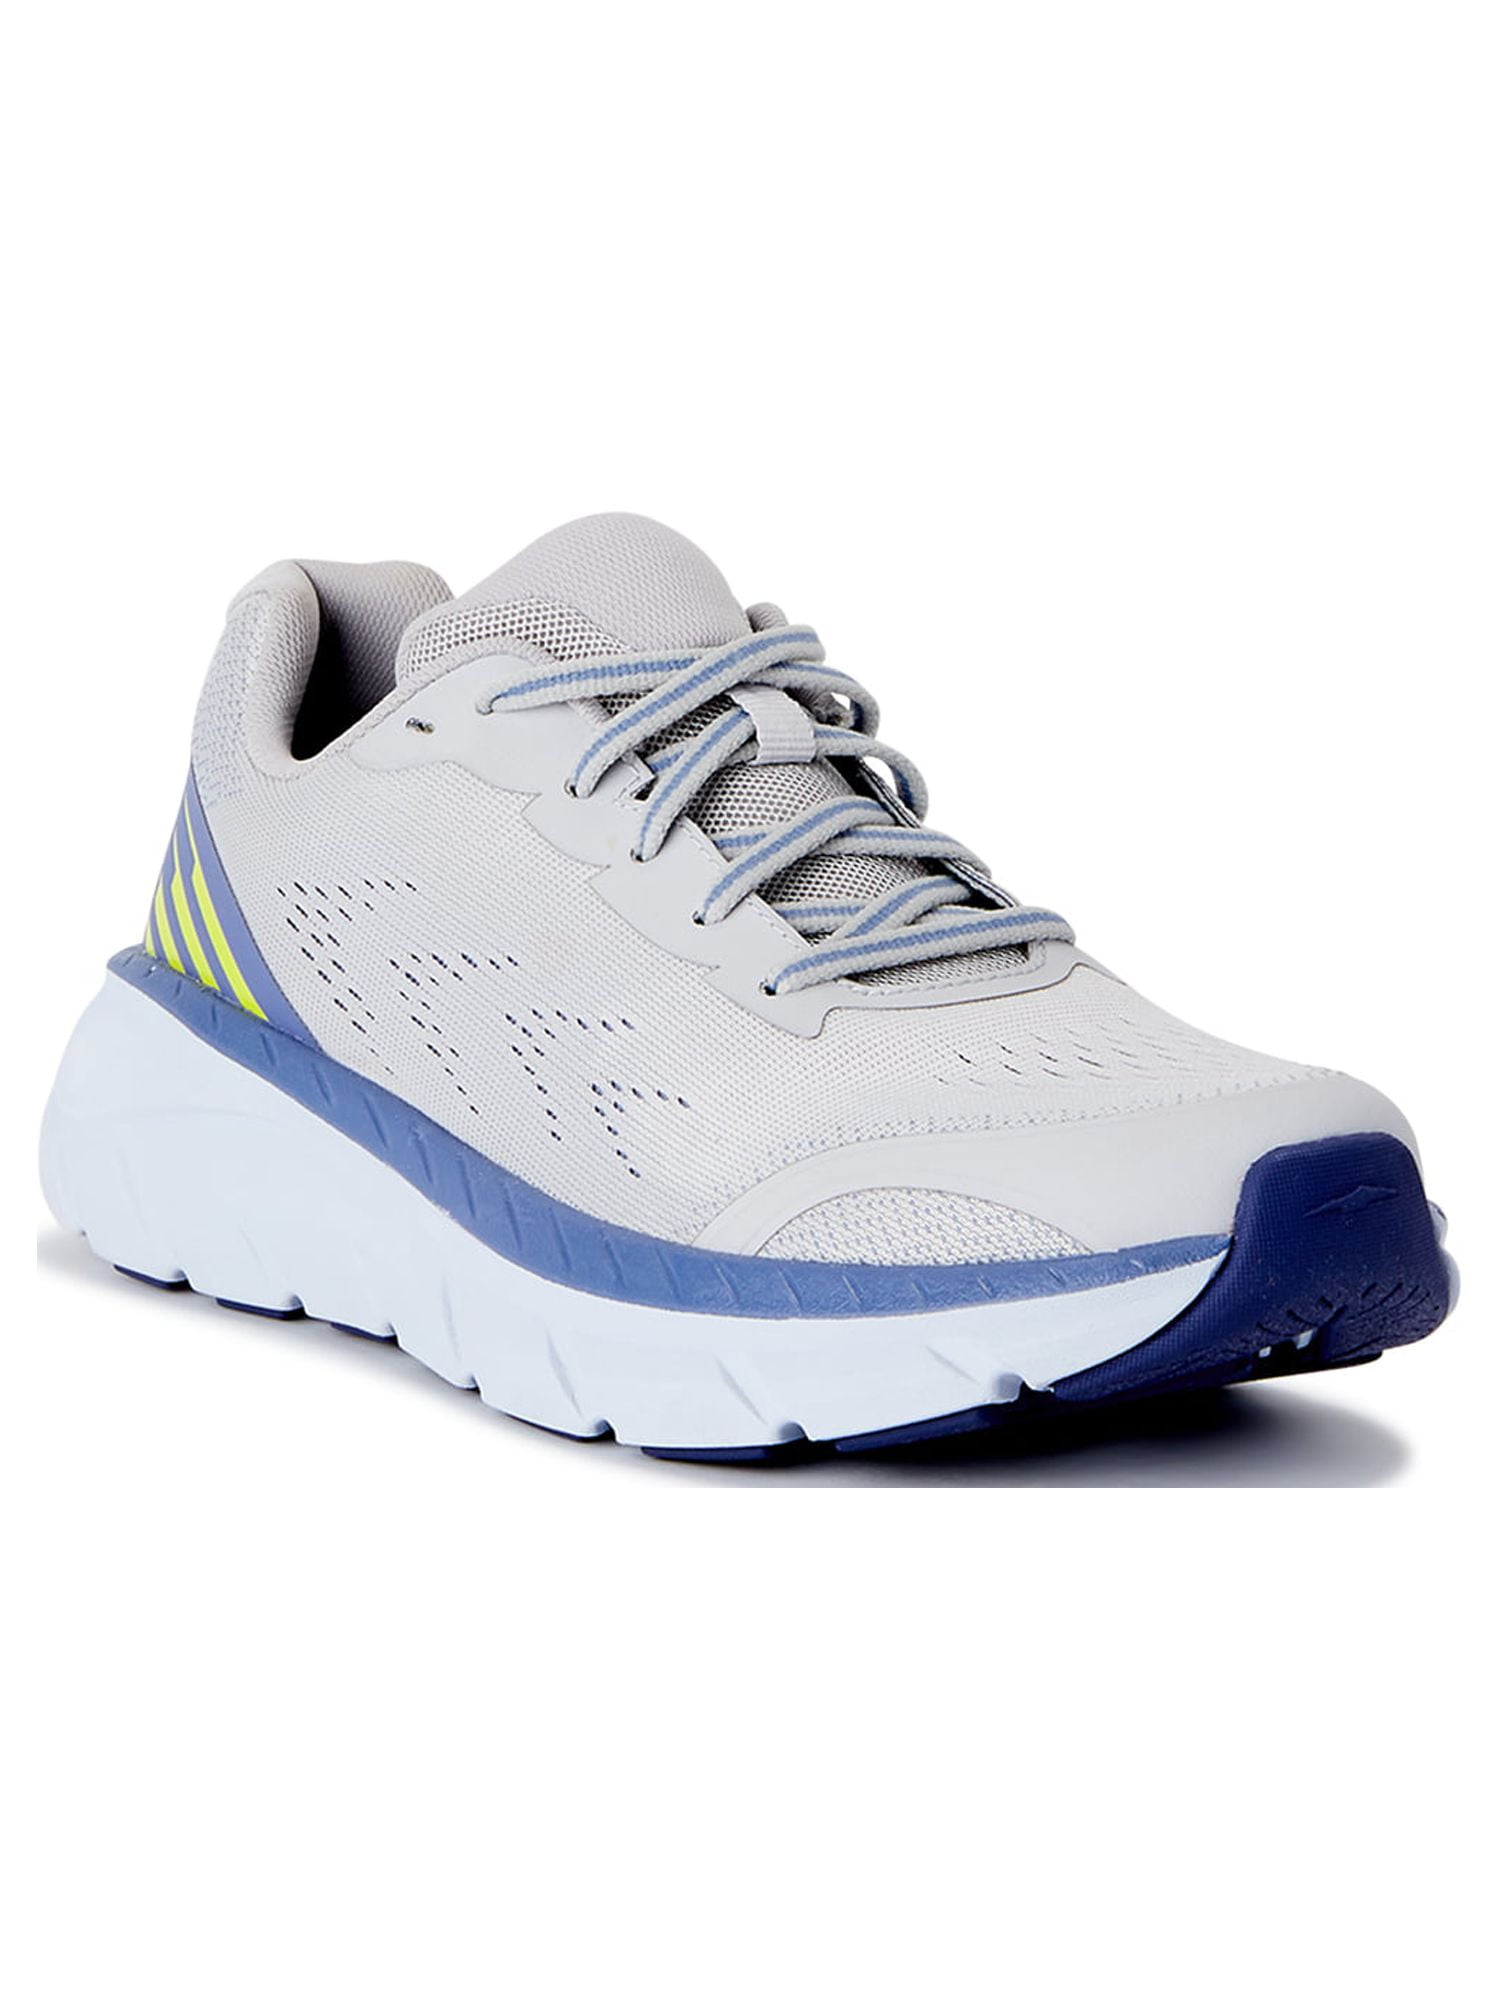 Avia Women's Hightail Athletic Sneakers, Wide Width Available - Walmart.com